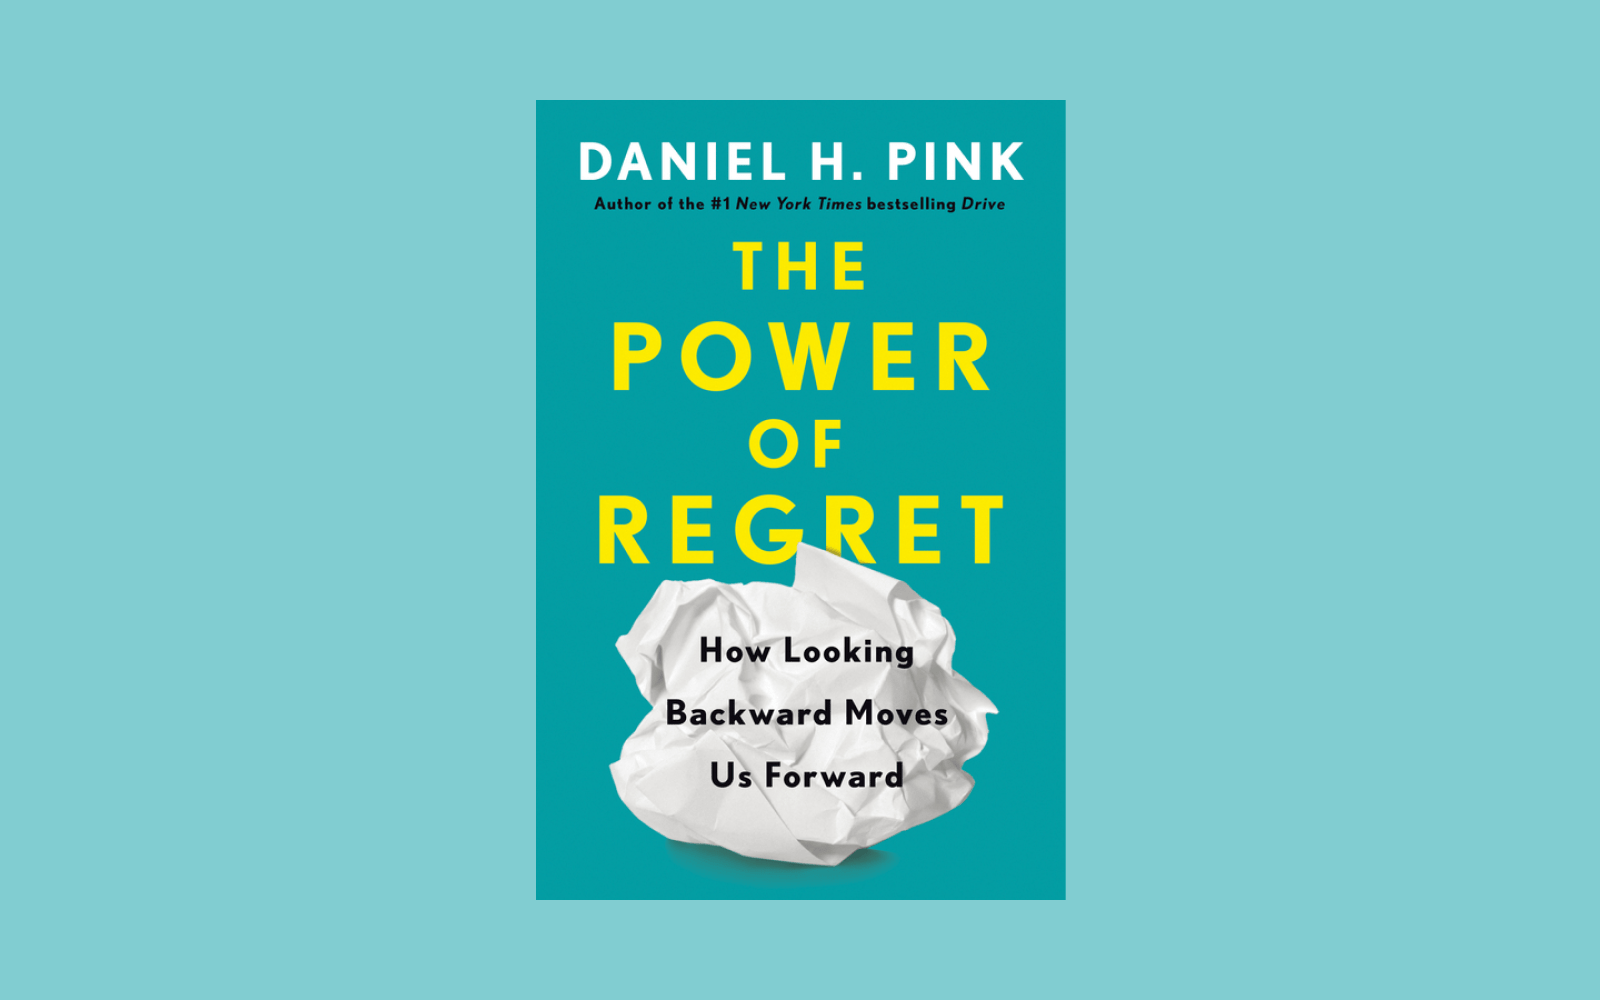 The Power of Regret book by Daniel Pink